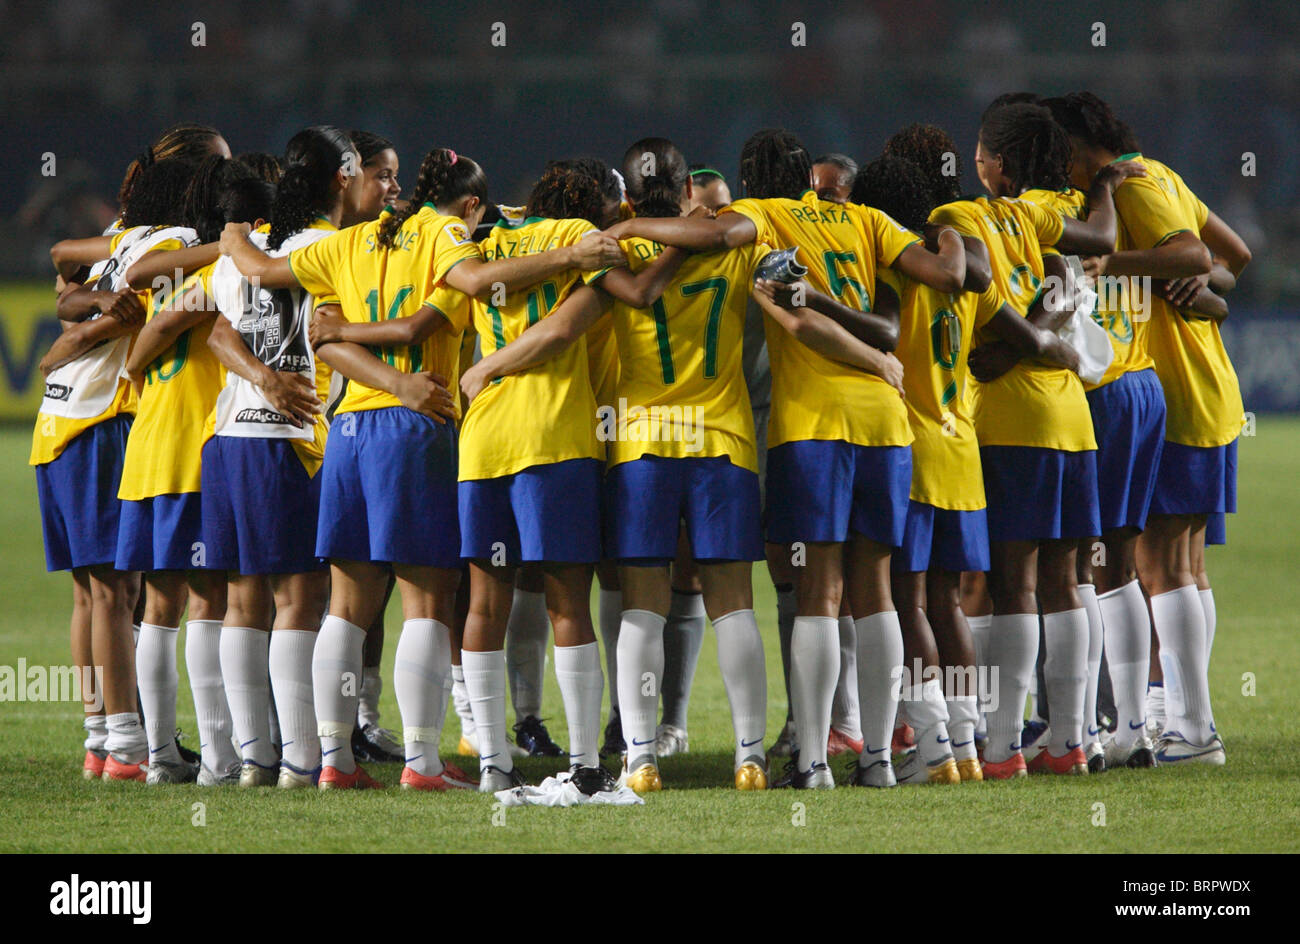 The Brazilian National Team gathers together after defeating China in a 2007 Women's World Cup soccer match. Stock Photo